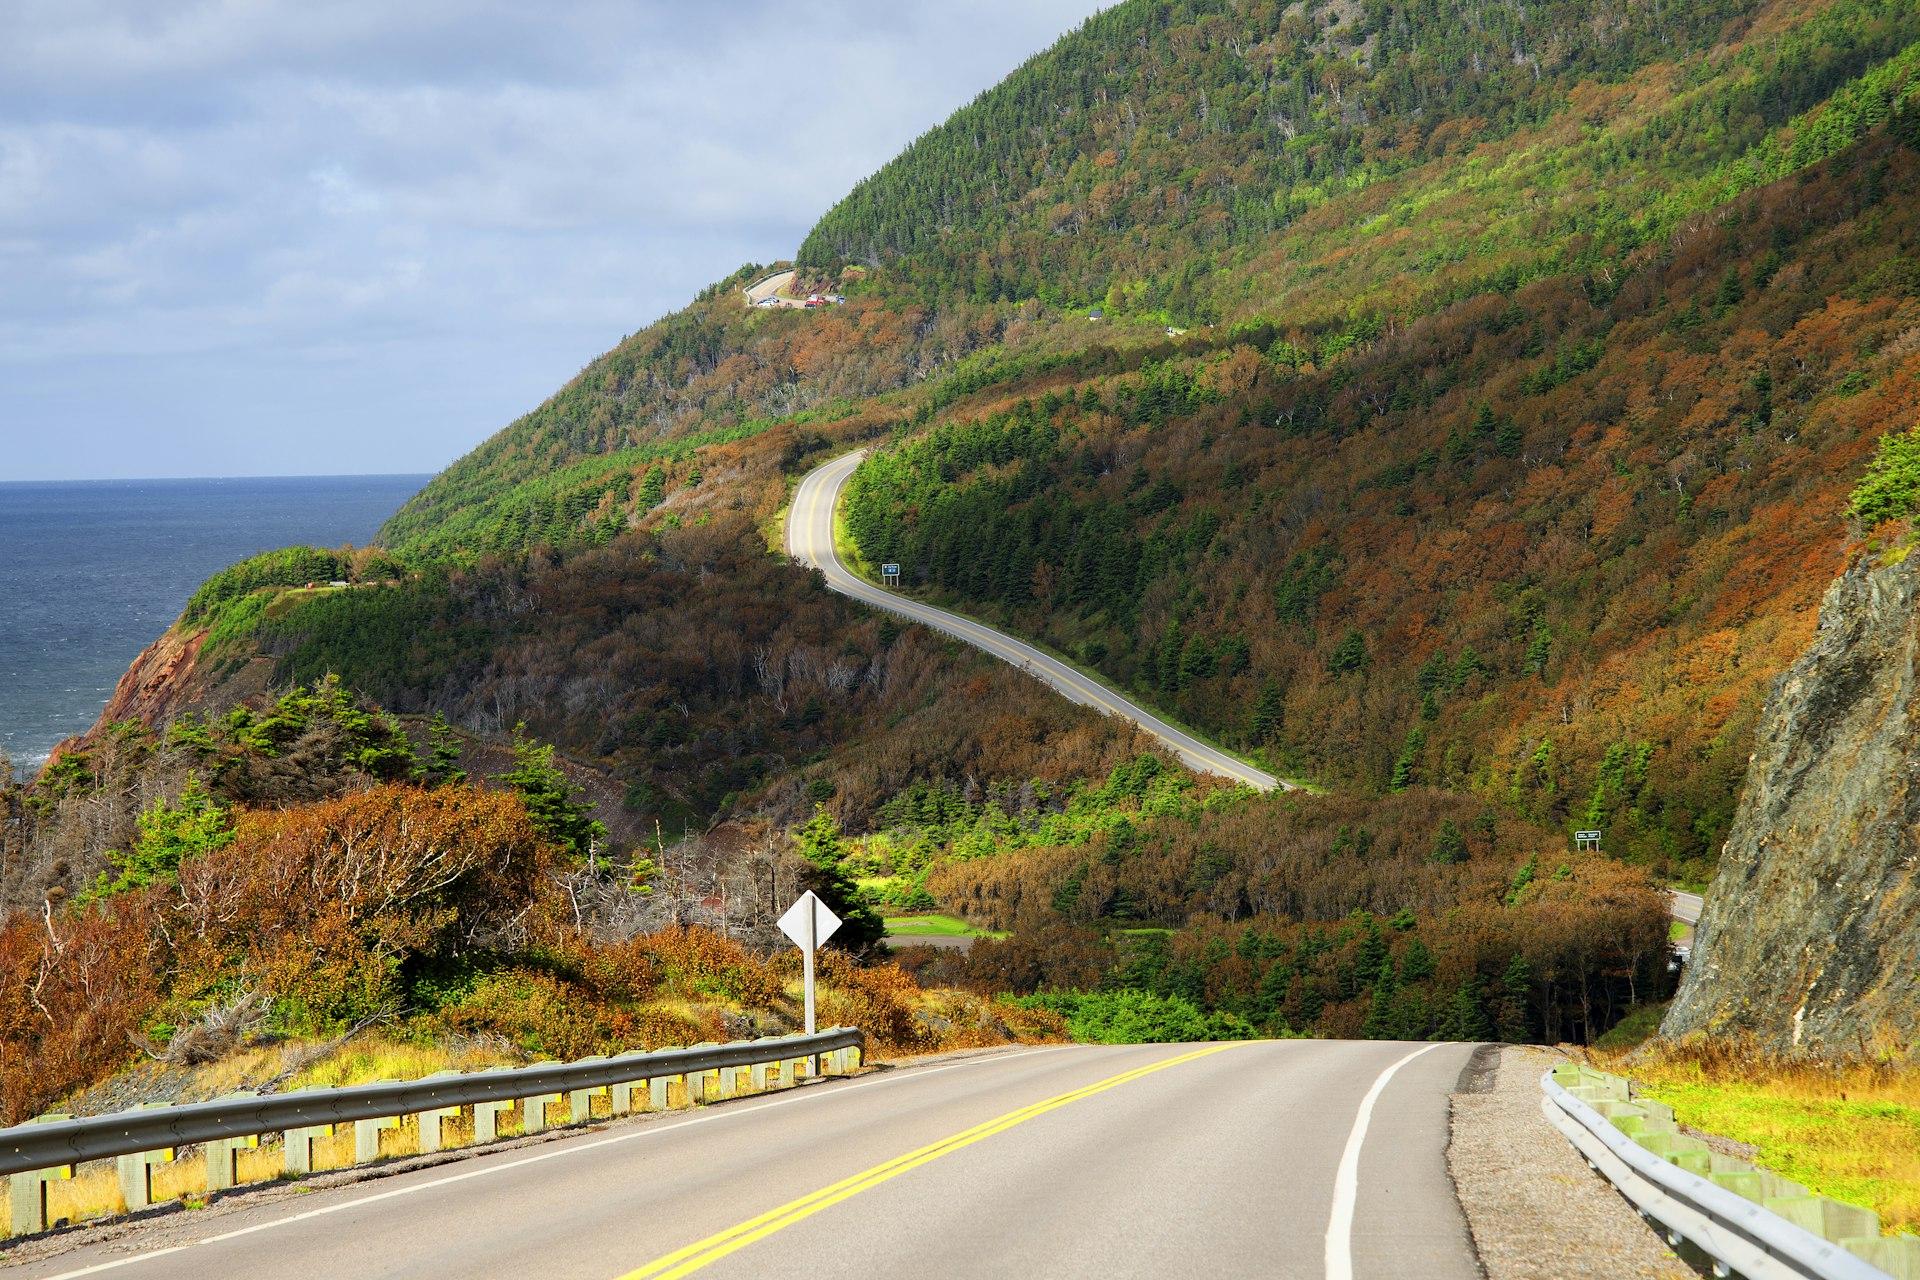 A road unspools with the sea on one side and dramatic fall foliage on the other, Cabot Trail, Cape Breton, Nova Scotia, Canada